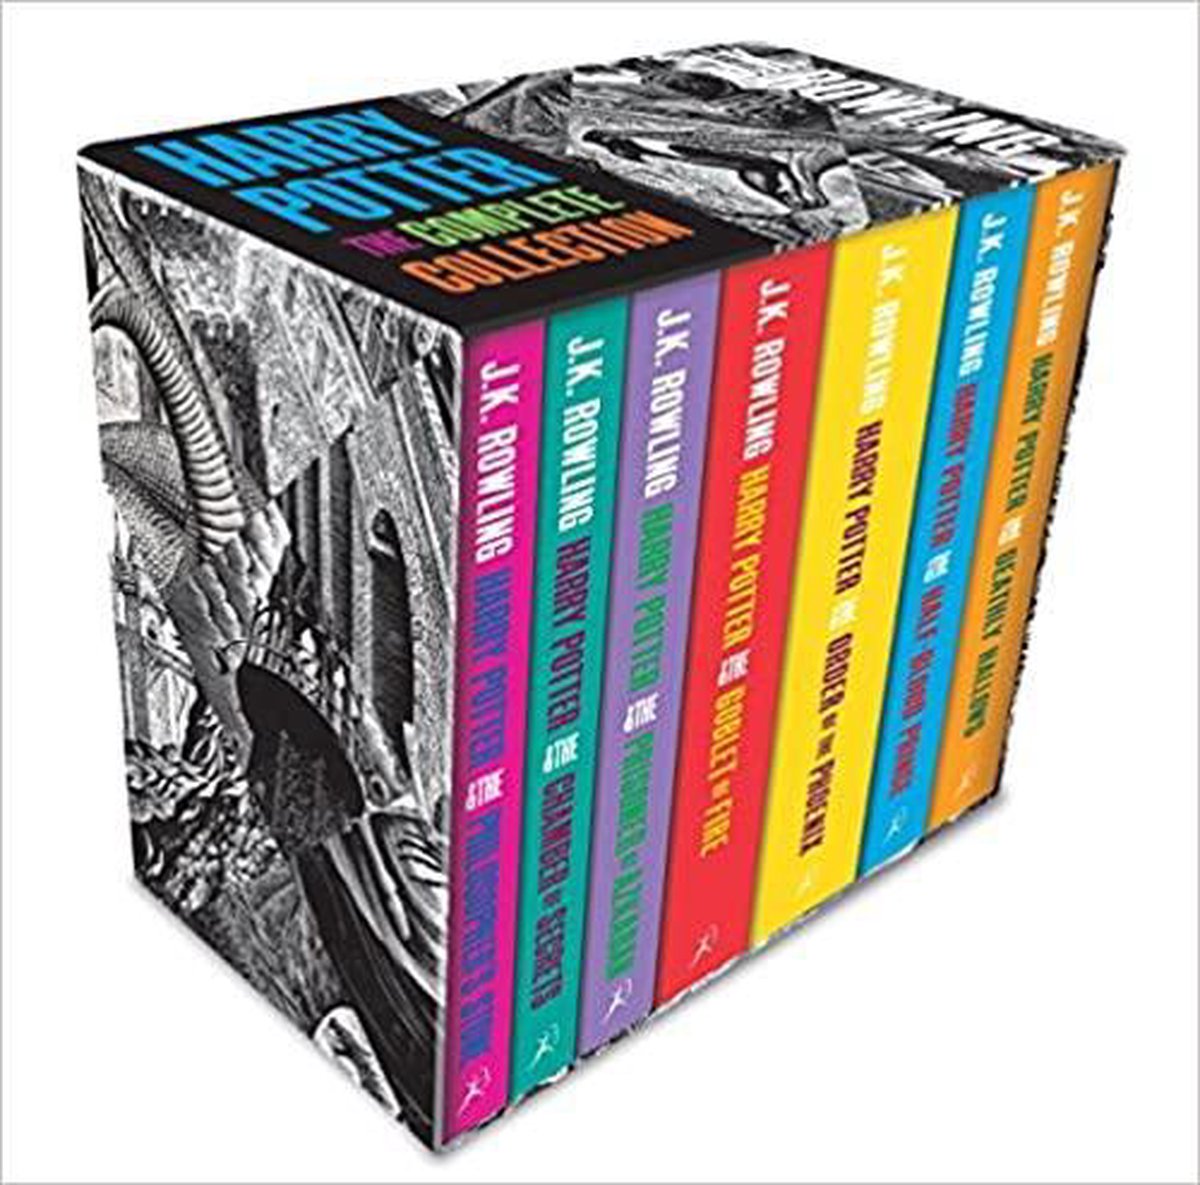 Harry Potter Boxed Set: The Complete Collection (Adult J.K. Rowling |...